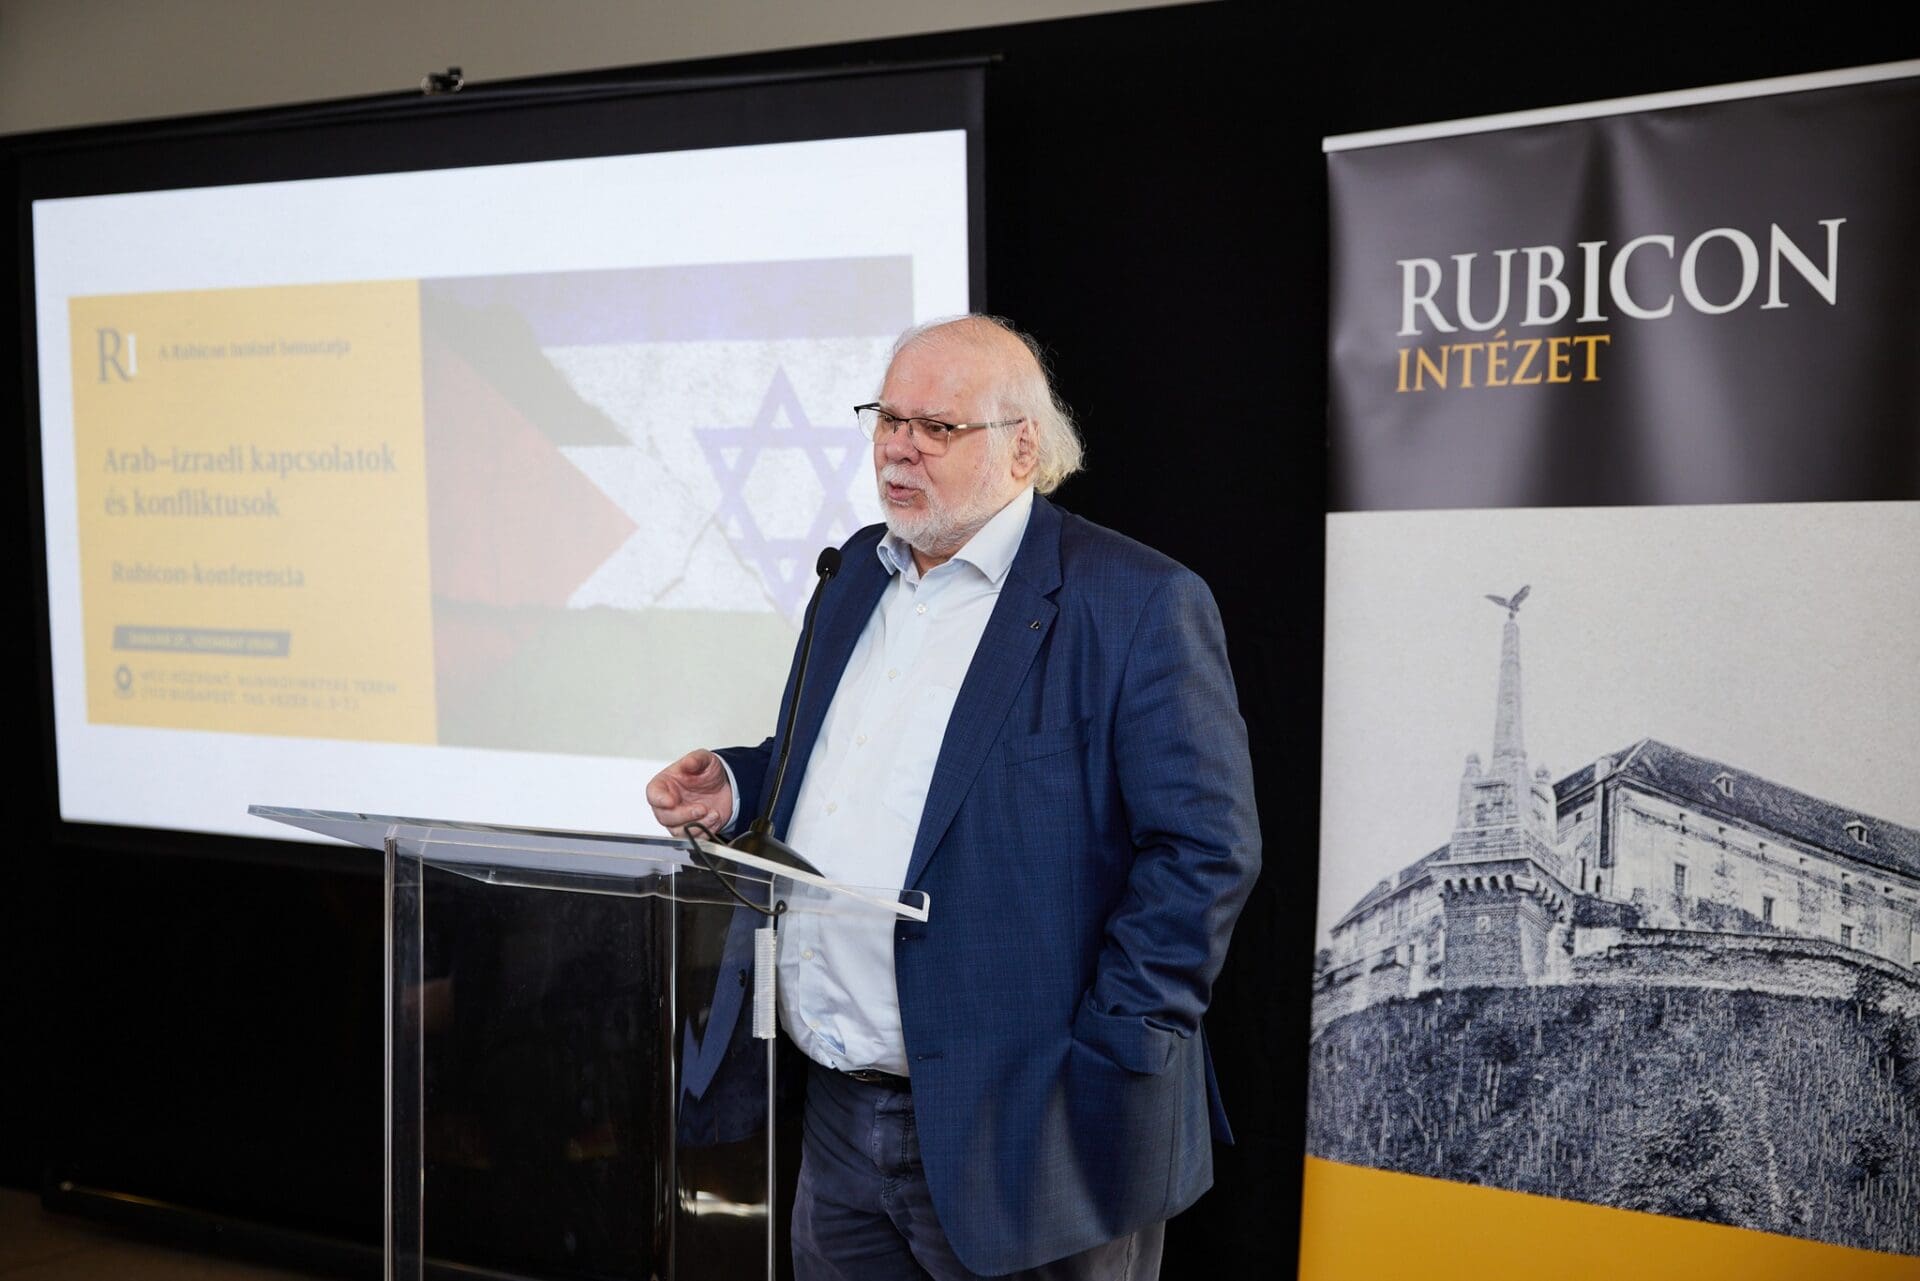 Co-Chairman of the Rubicon Institute Árpád Rácz welcomes the participants of the conference on Arab-Israeli relations on 27 January 2024.